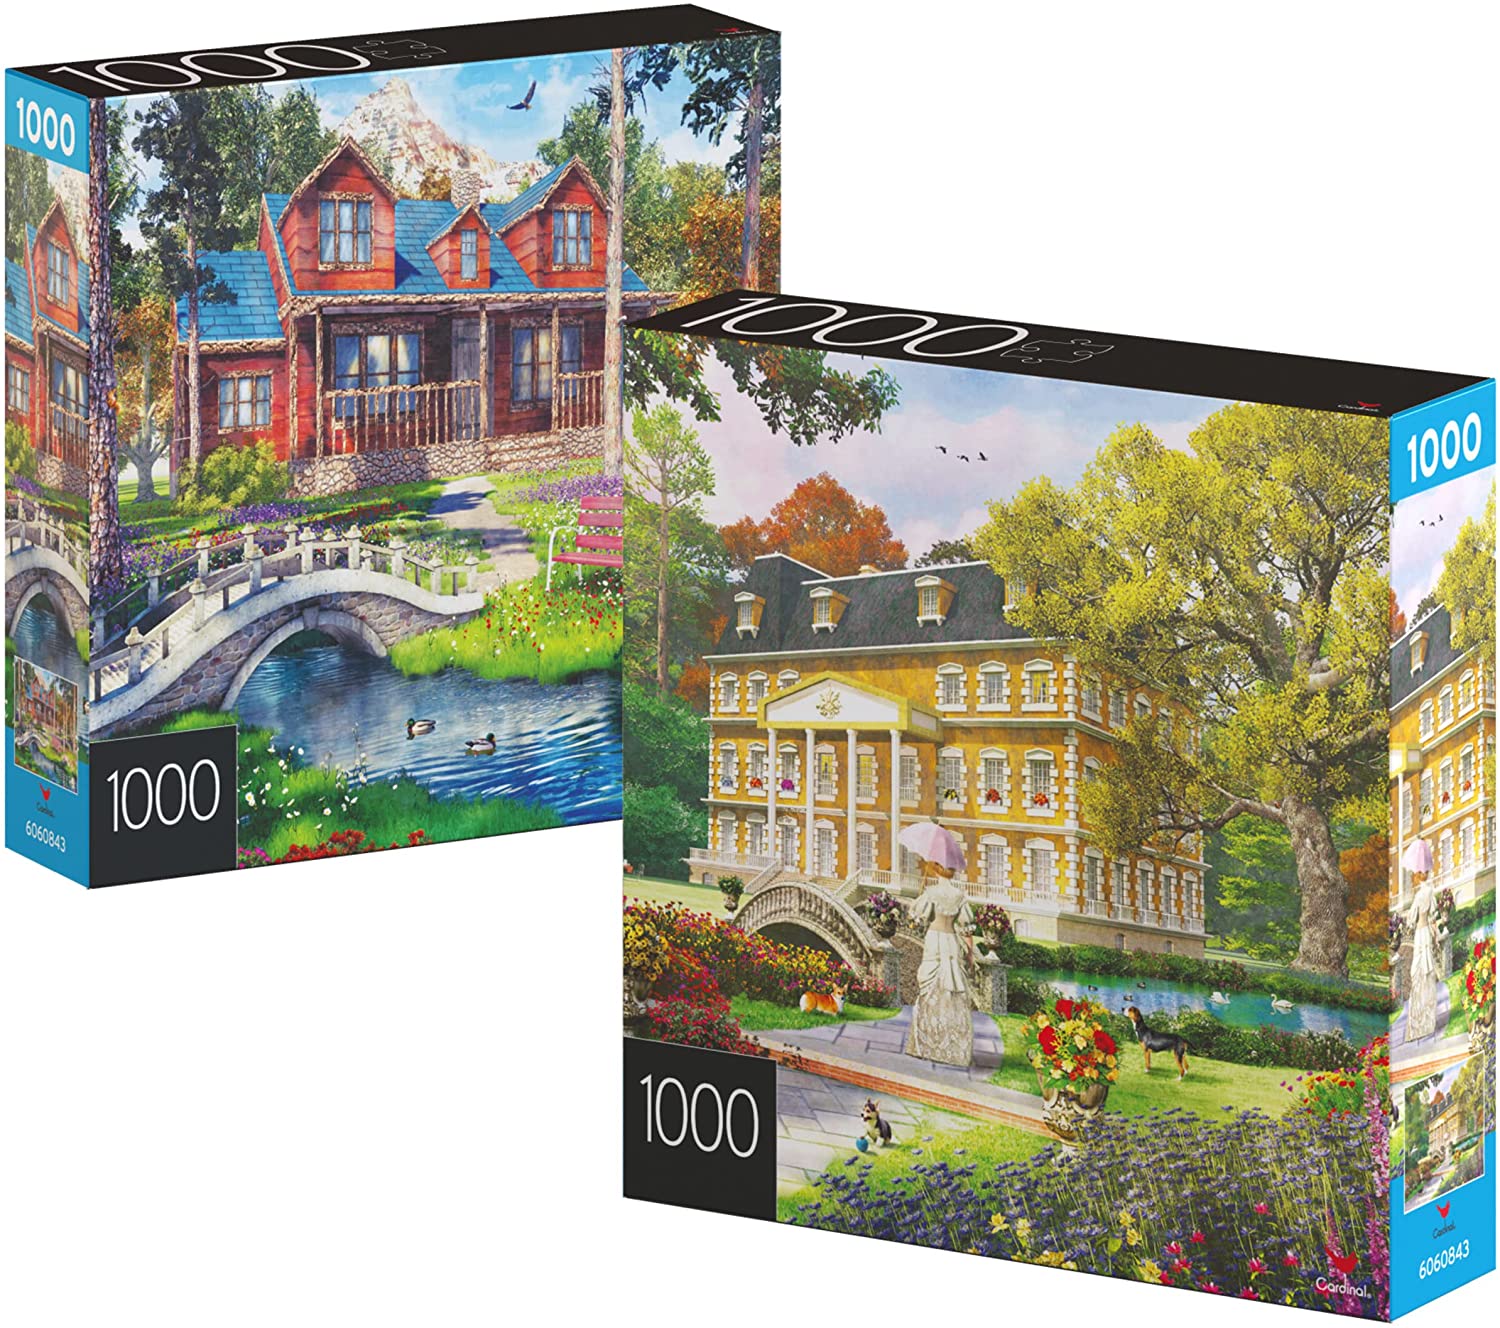 2-Pack 1000-Piece Jigsaw Puzzles (Pine Cabin and Summer Estate) $9.11 + Free Shipping w/ Prime or on orders over $25